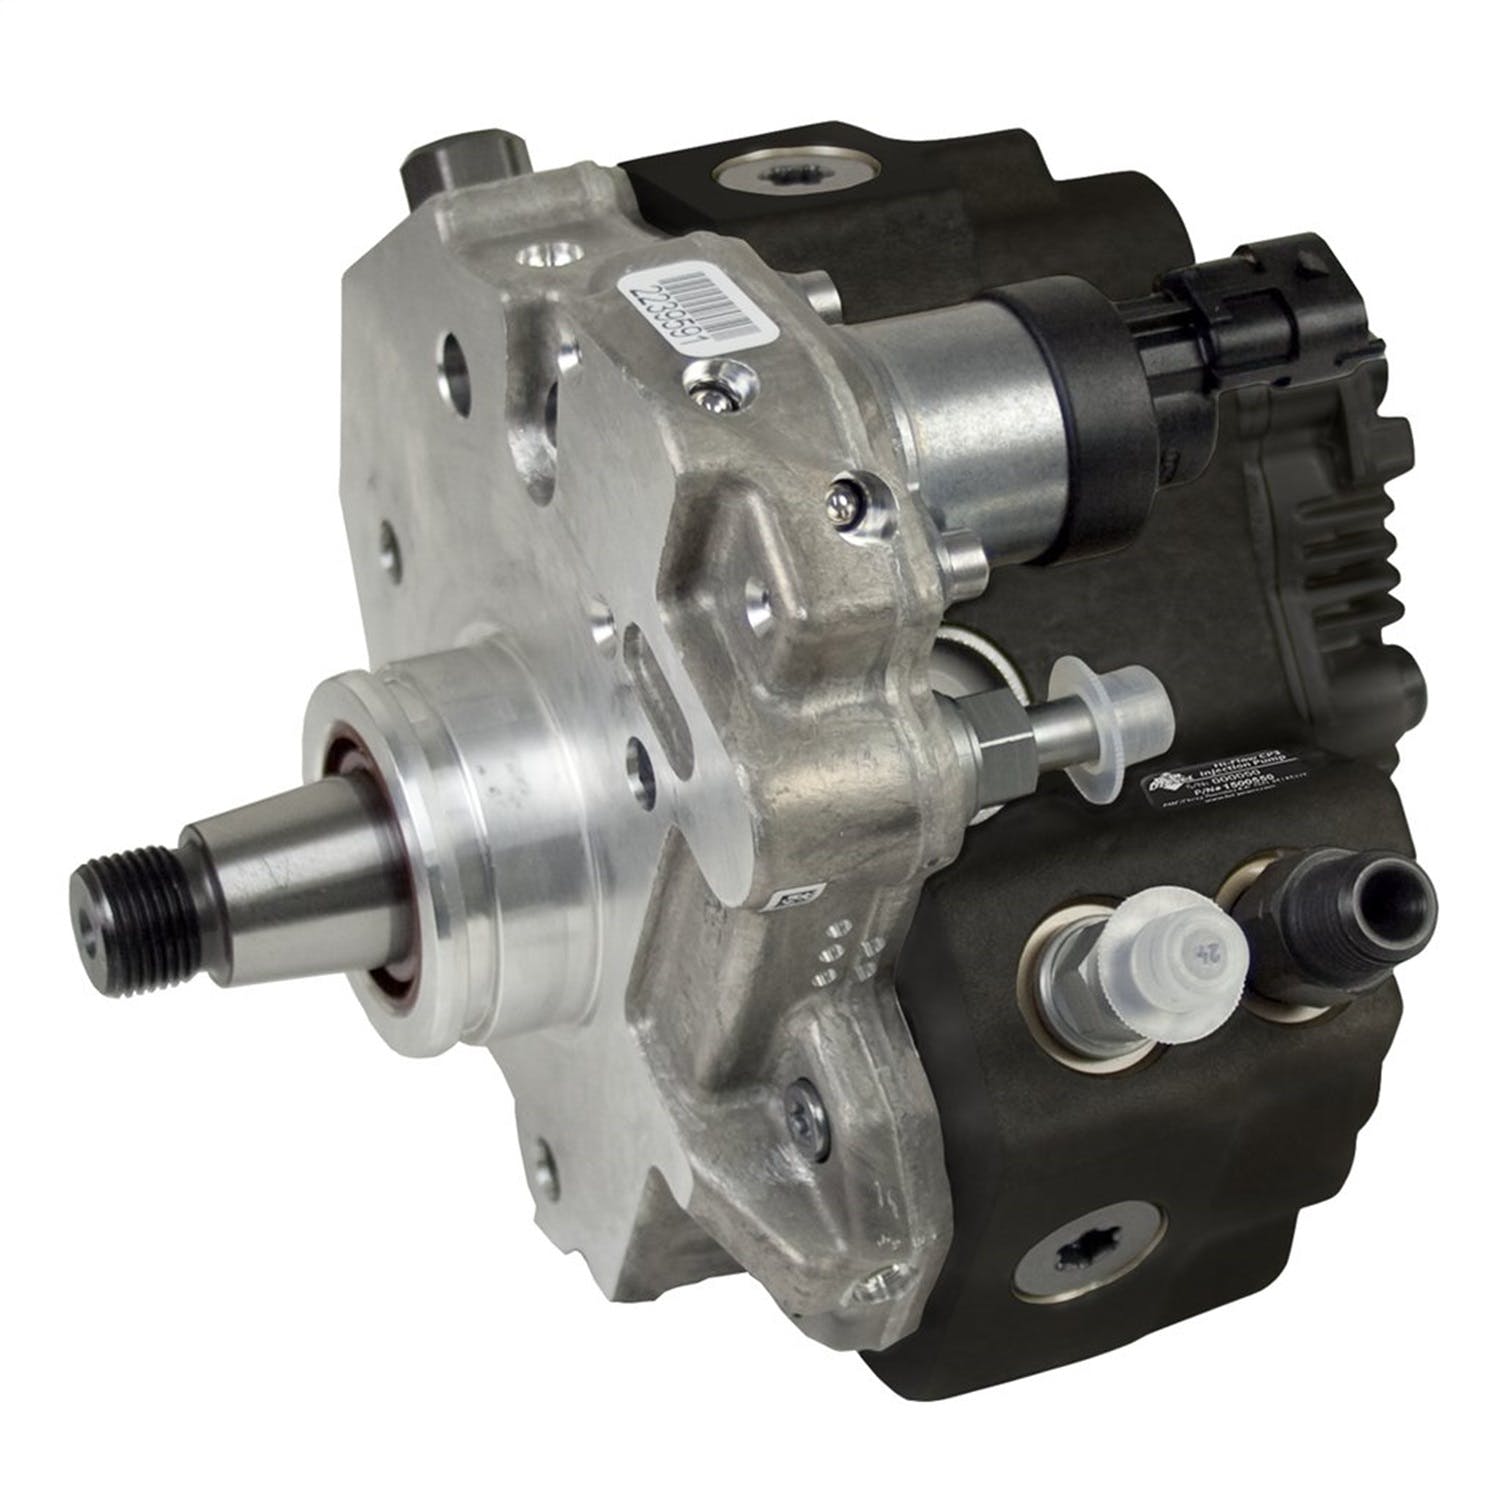 BD Diesel Performance 1050550 High Power Common Rail Injection Pump